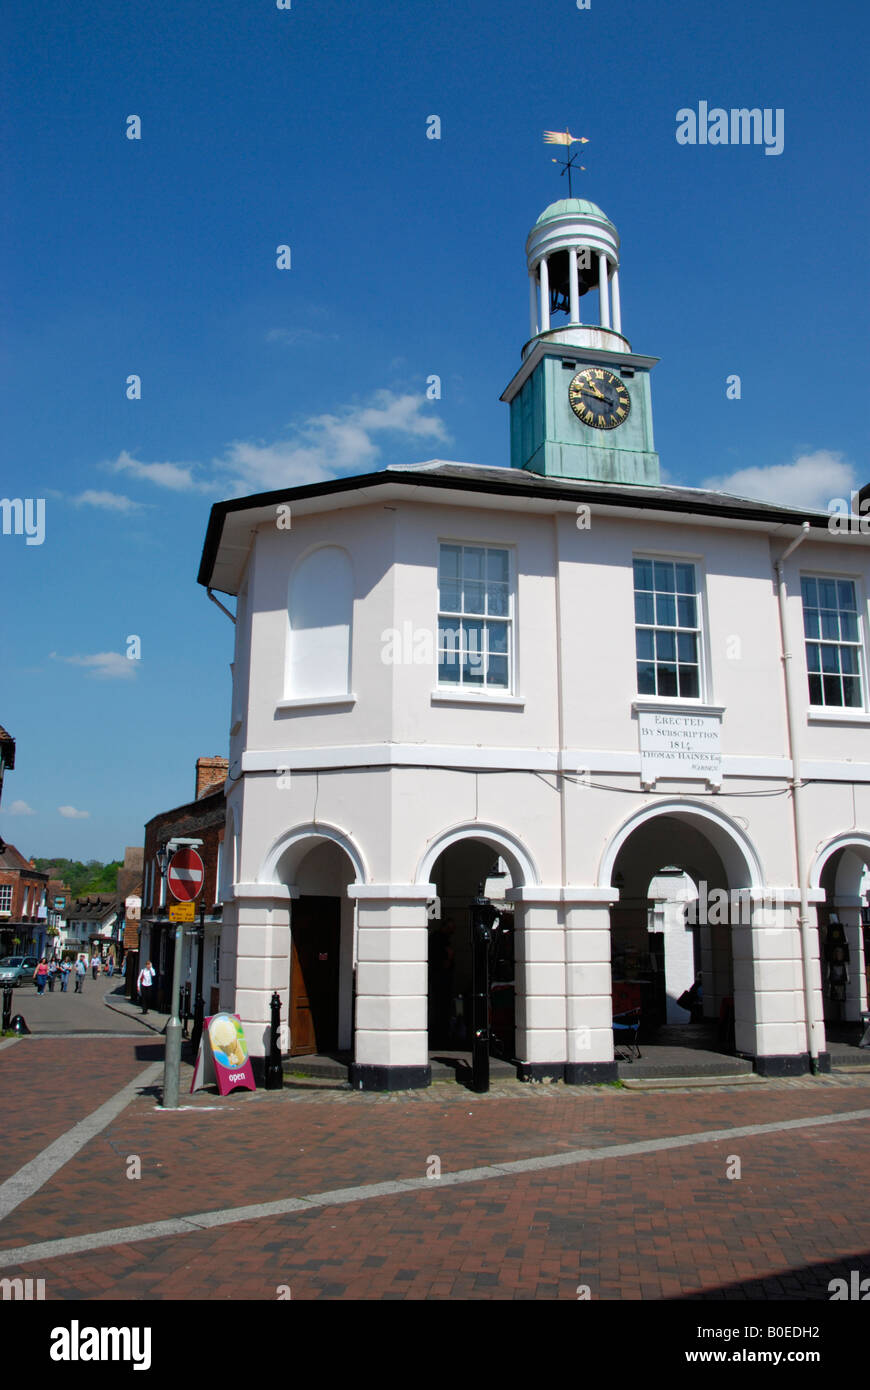 Il Pepperpot Old Town Hall High Street Godalming Surrey in Inghilterra REGNO UNITO Foto Stock